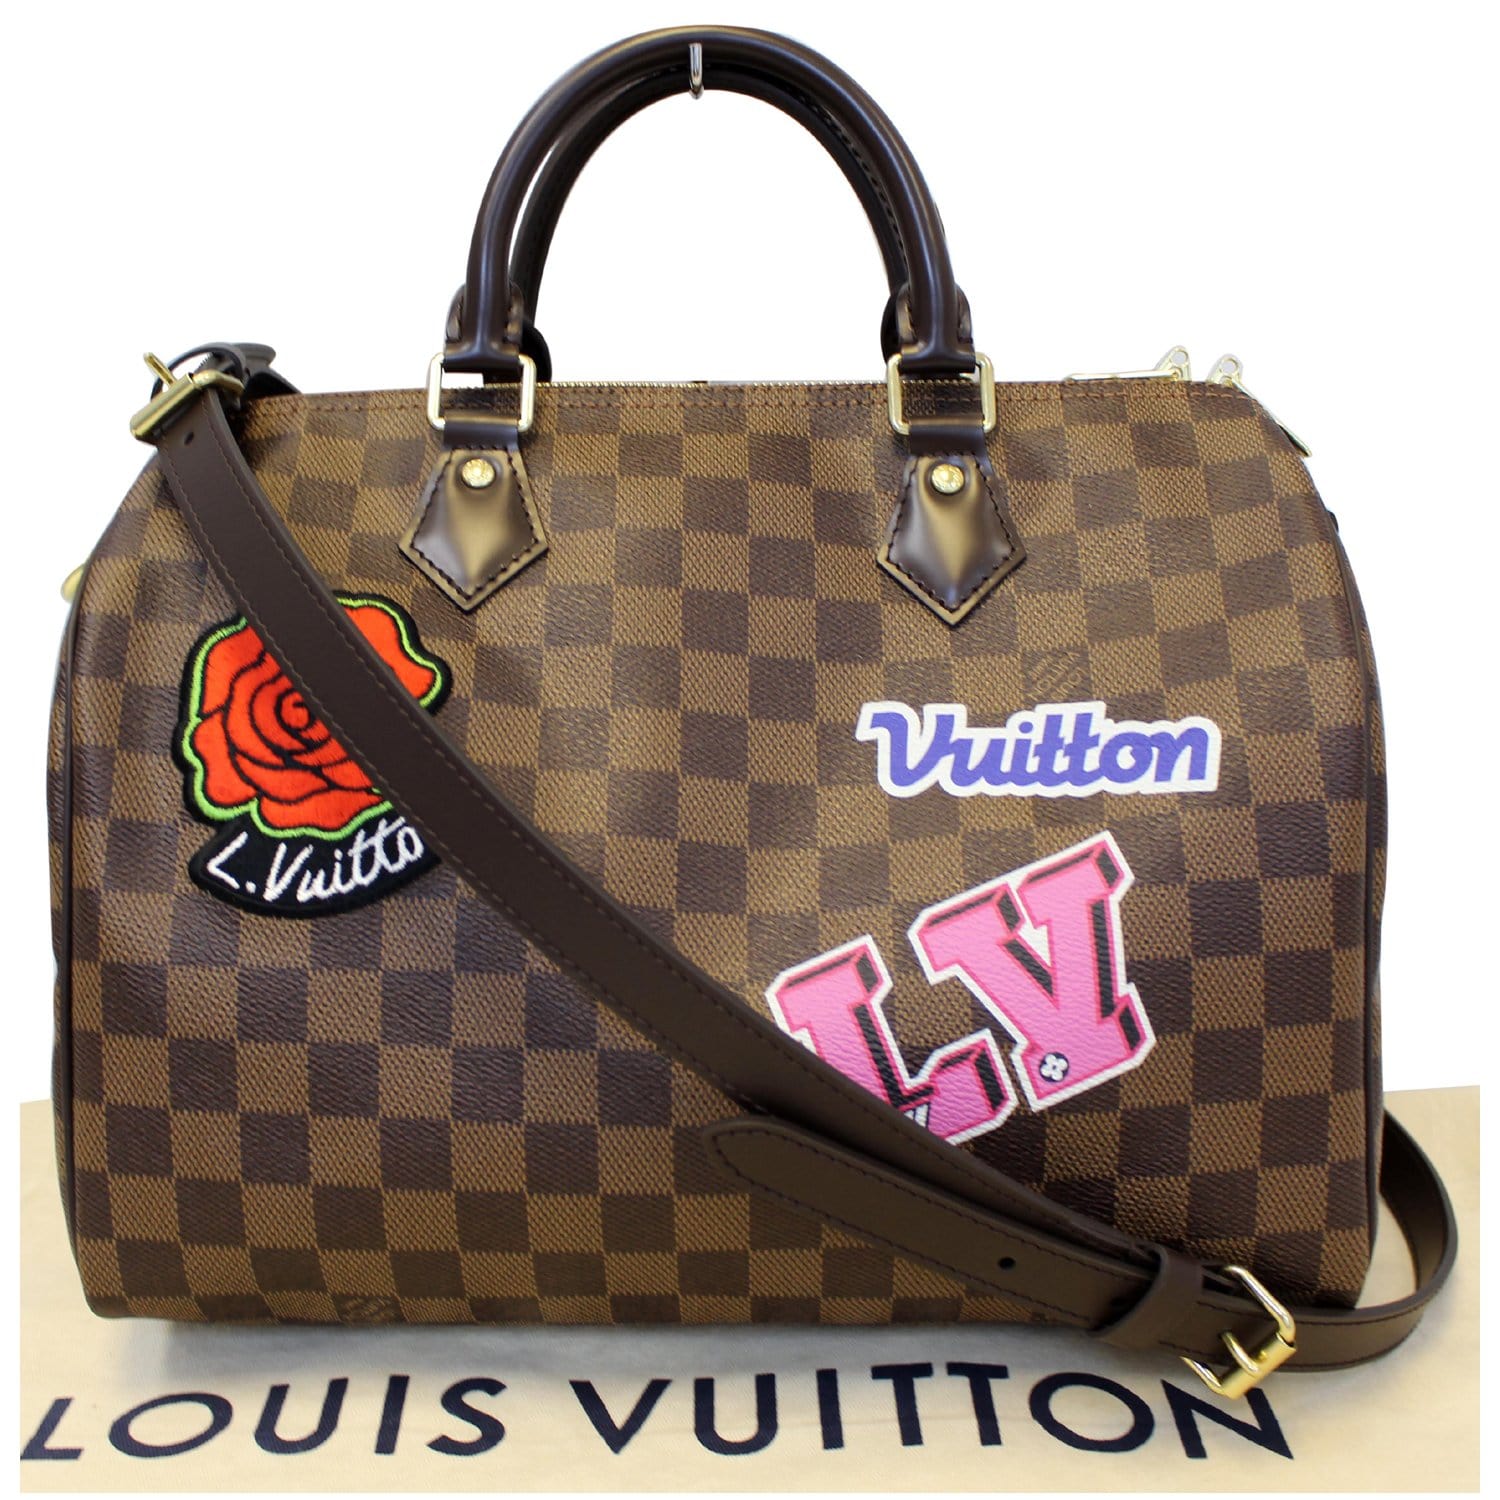 Speedy Bandouliere Patches Limited Edition 30 Shoulder bag in Monogram  coated canvas, Gold Hardware